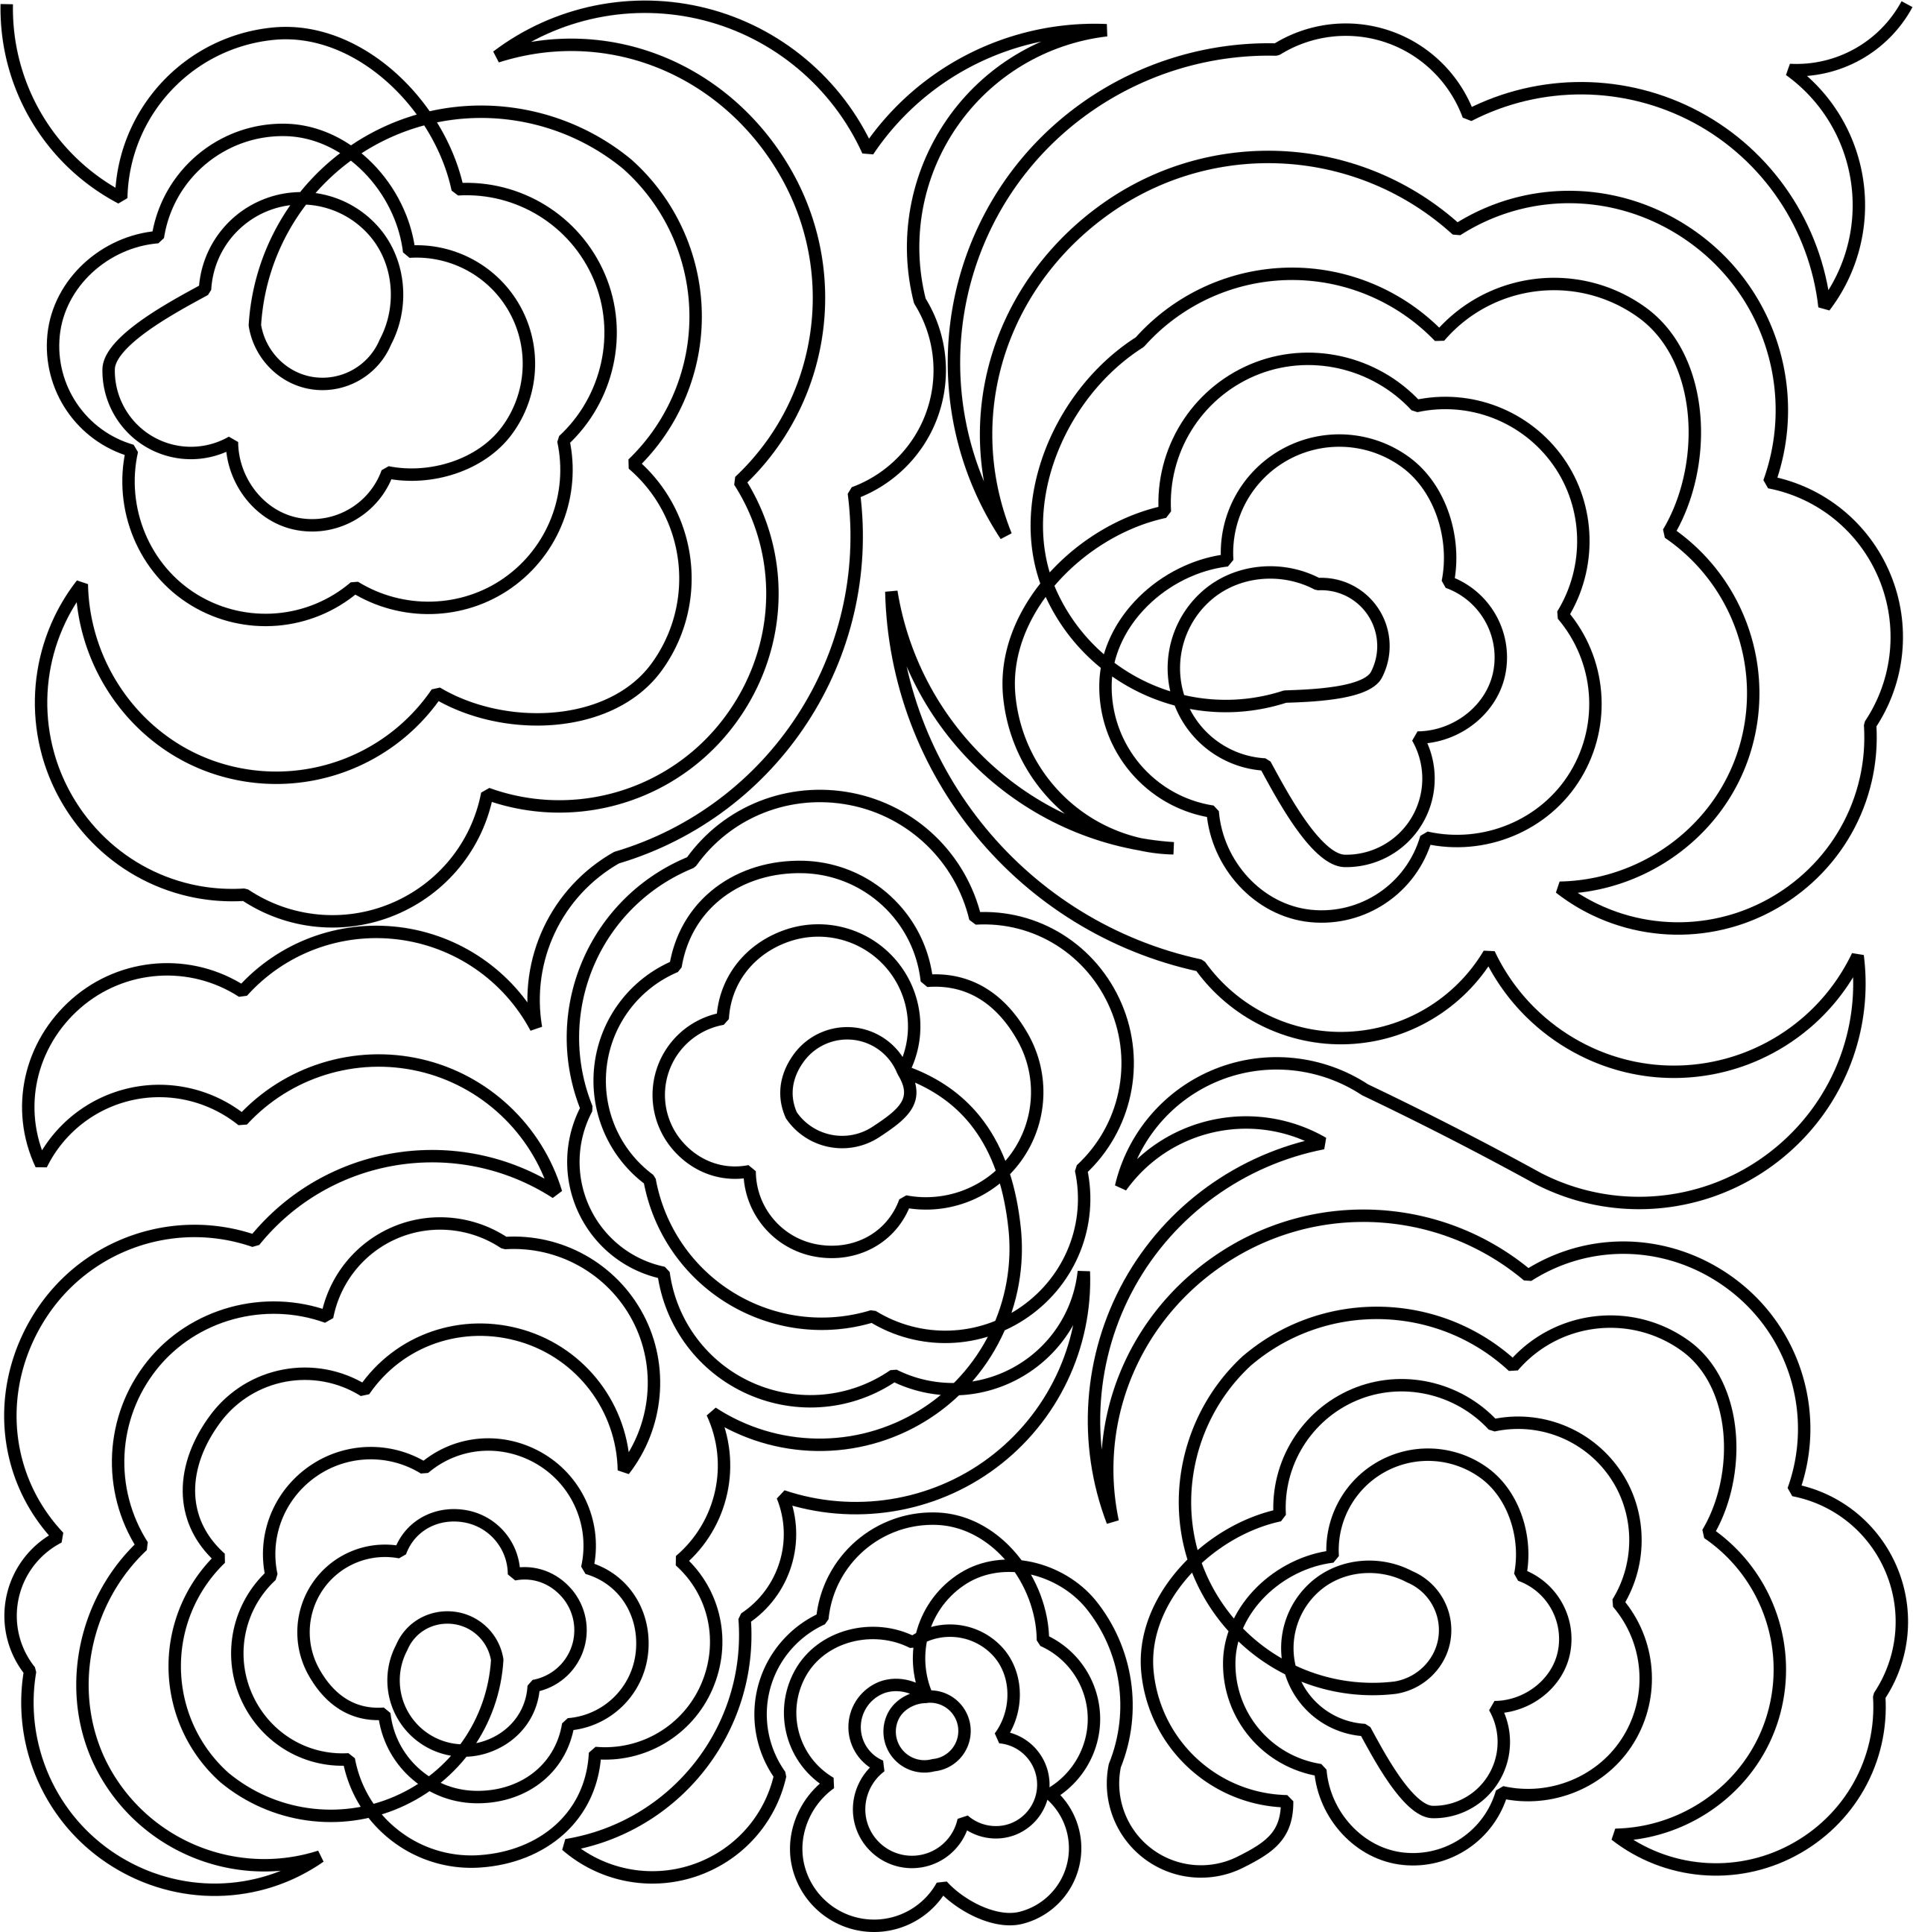 Cabbage Rose coloring #20, Download drawings